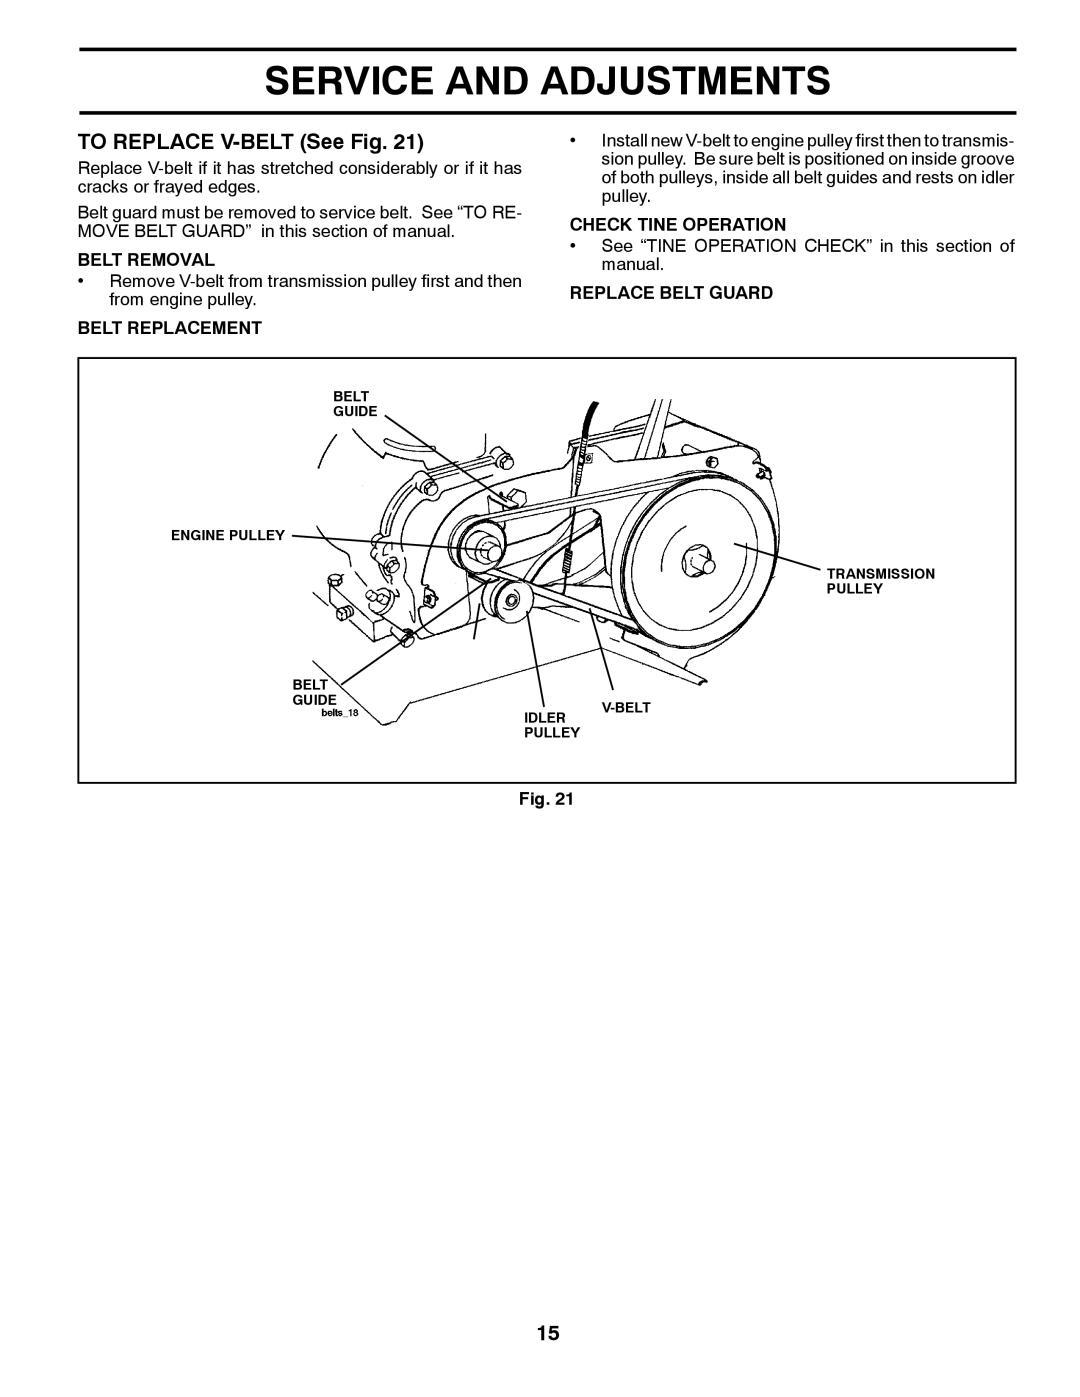 Poulan 96082001300 TO REPLACE V-BELT See Fig, Belt Removal, Belt Replacement, Check Tine Operation, Replace Belt Guard 